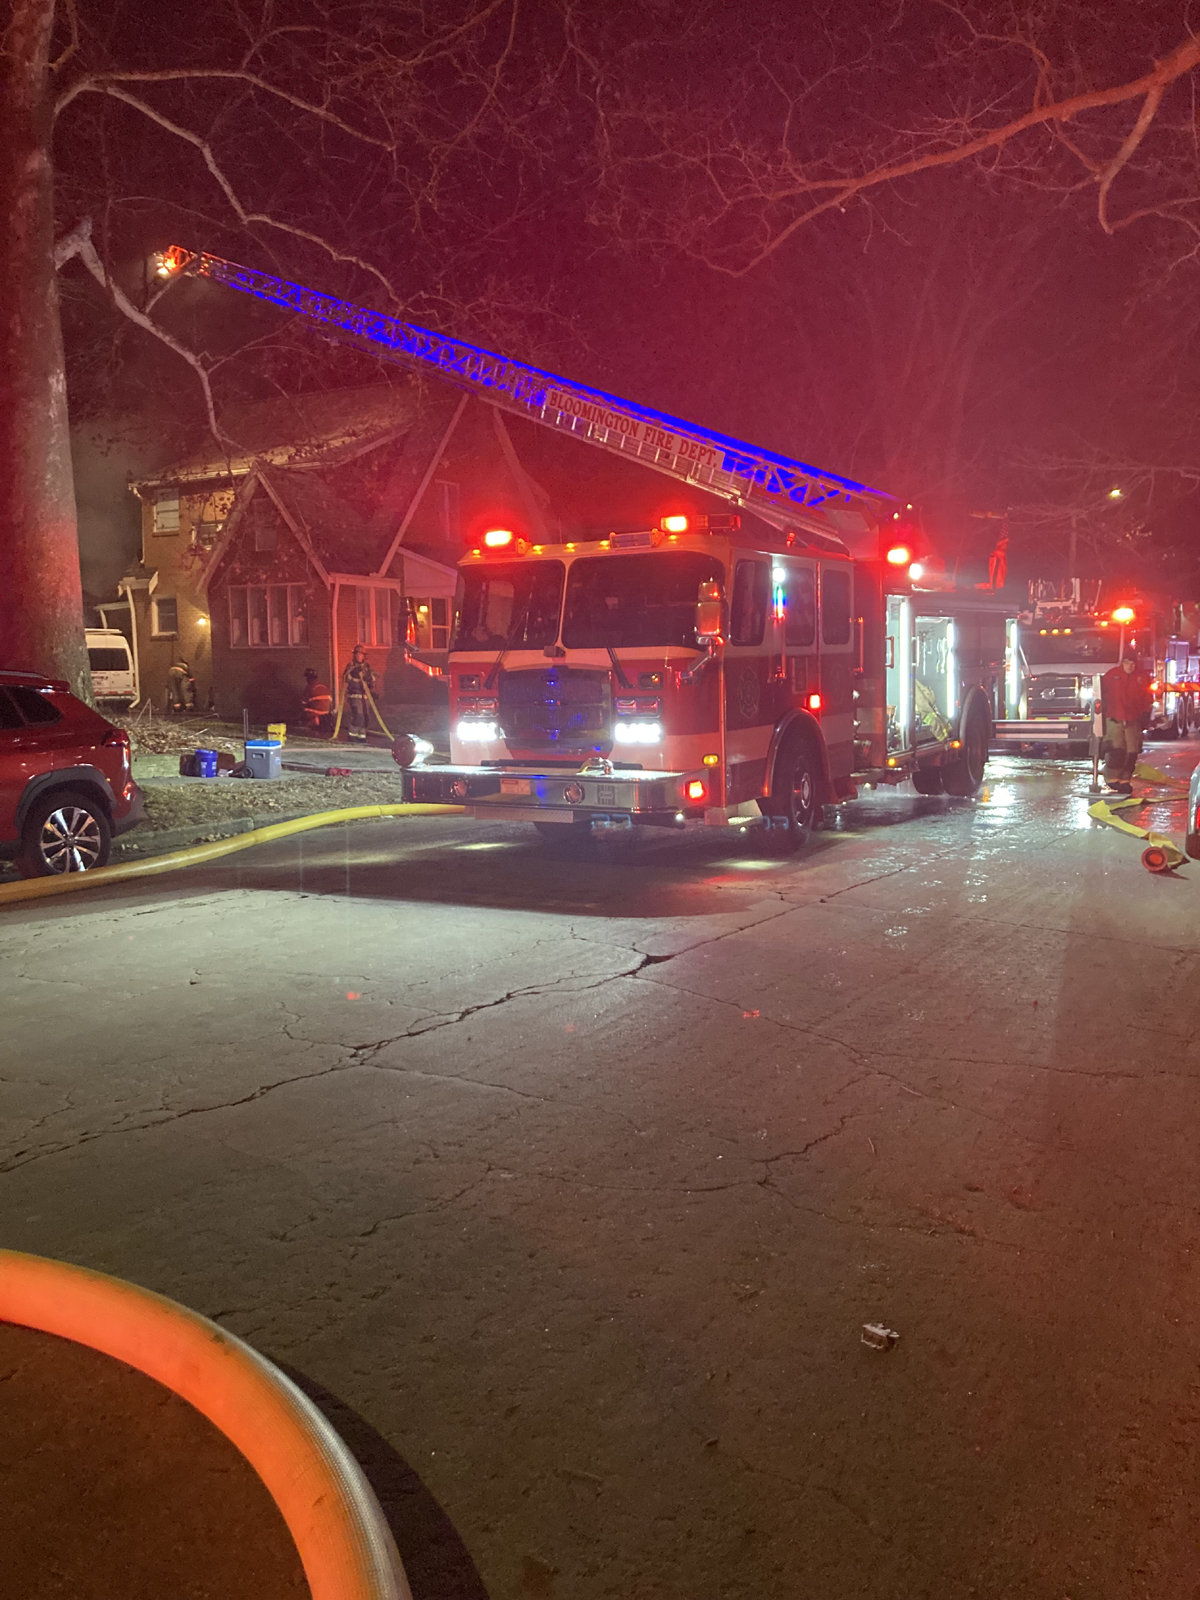 Garage on fire at at 507 E Walnut St. in Bloomington, IL (Photo courtesy of Bloomington Fire Department)